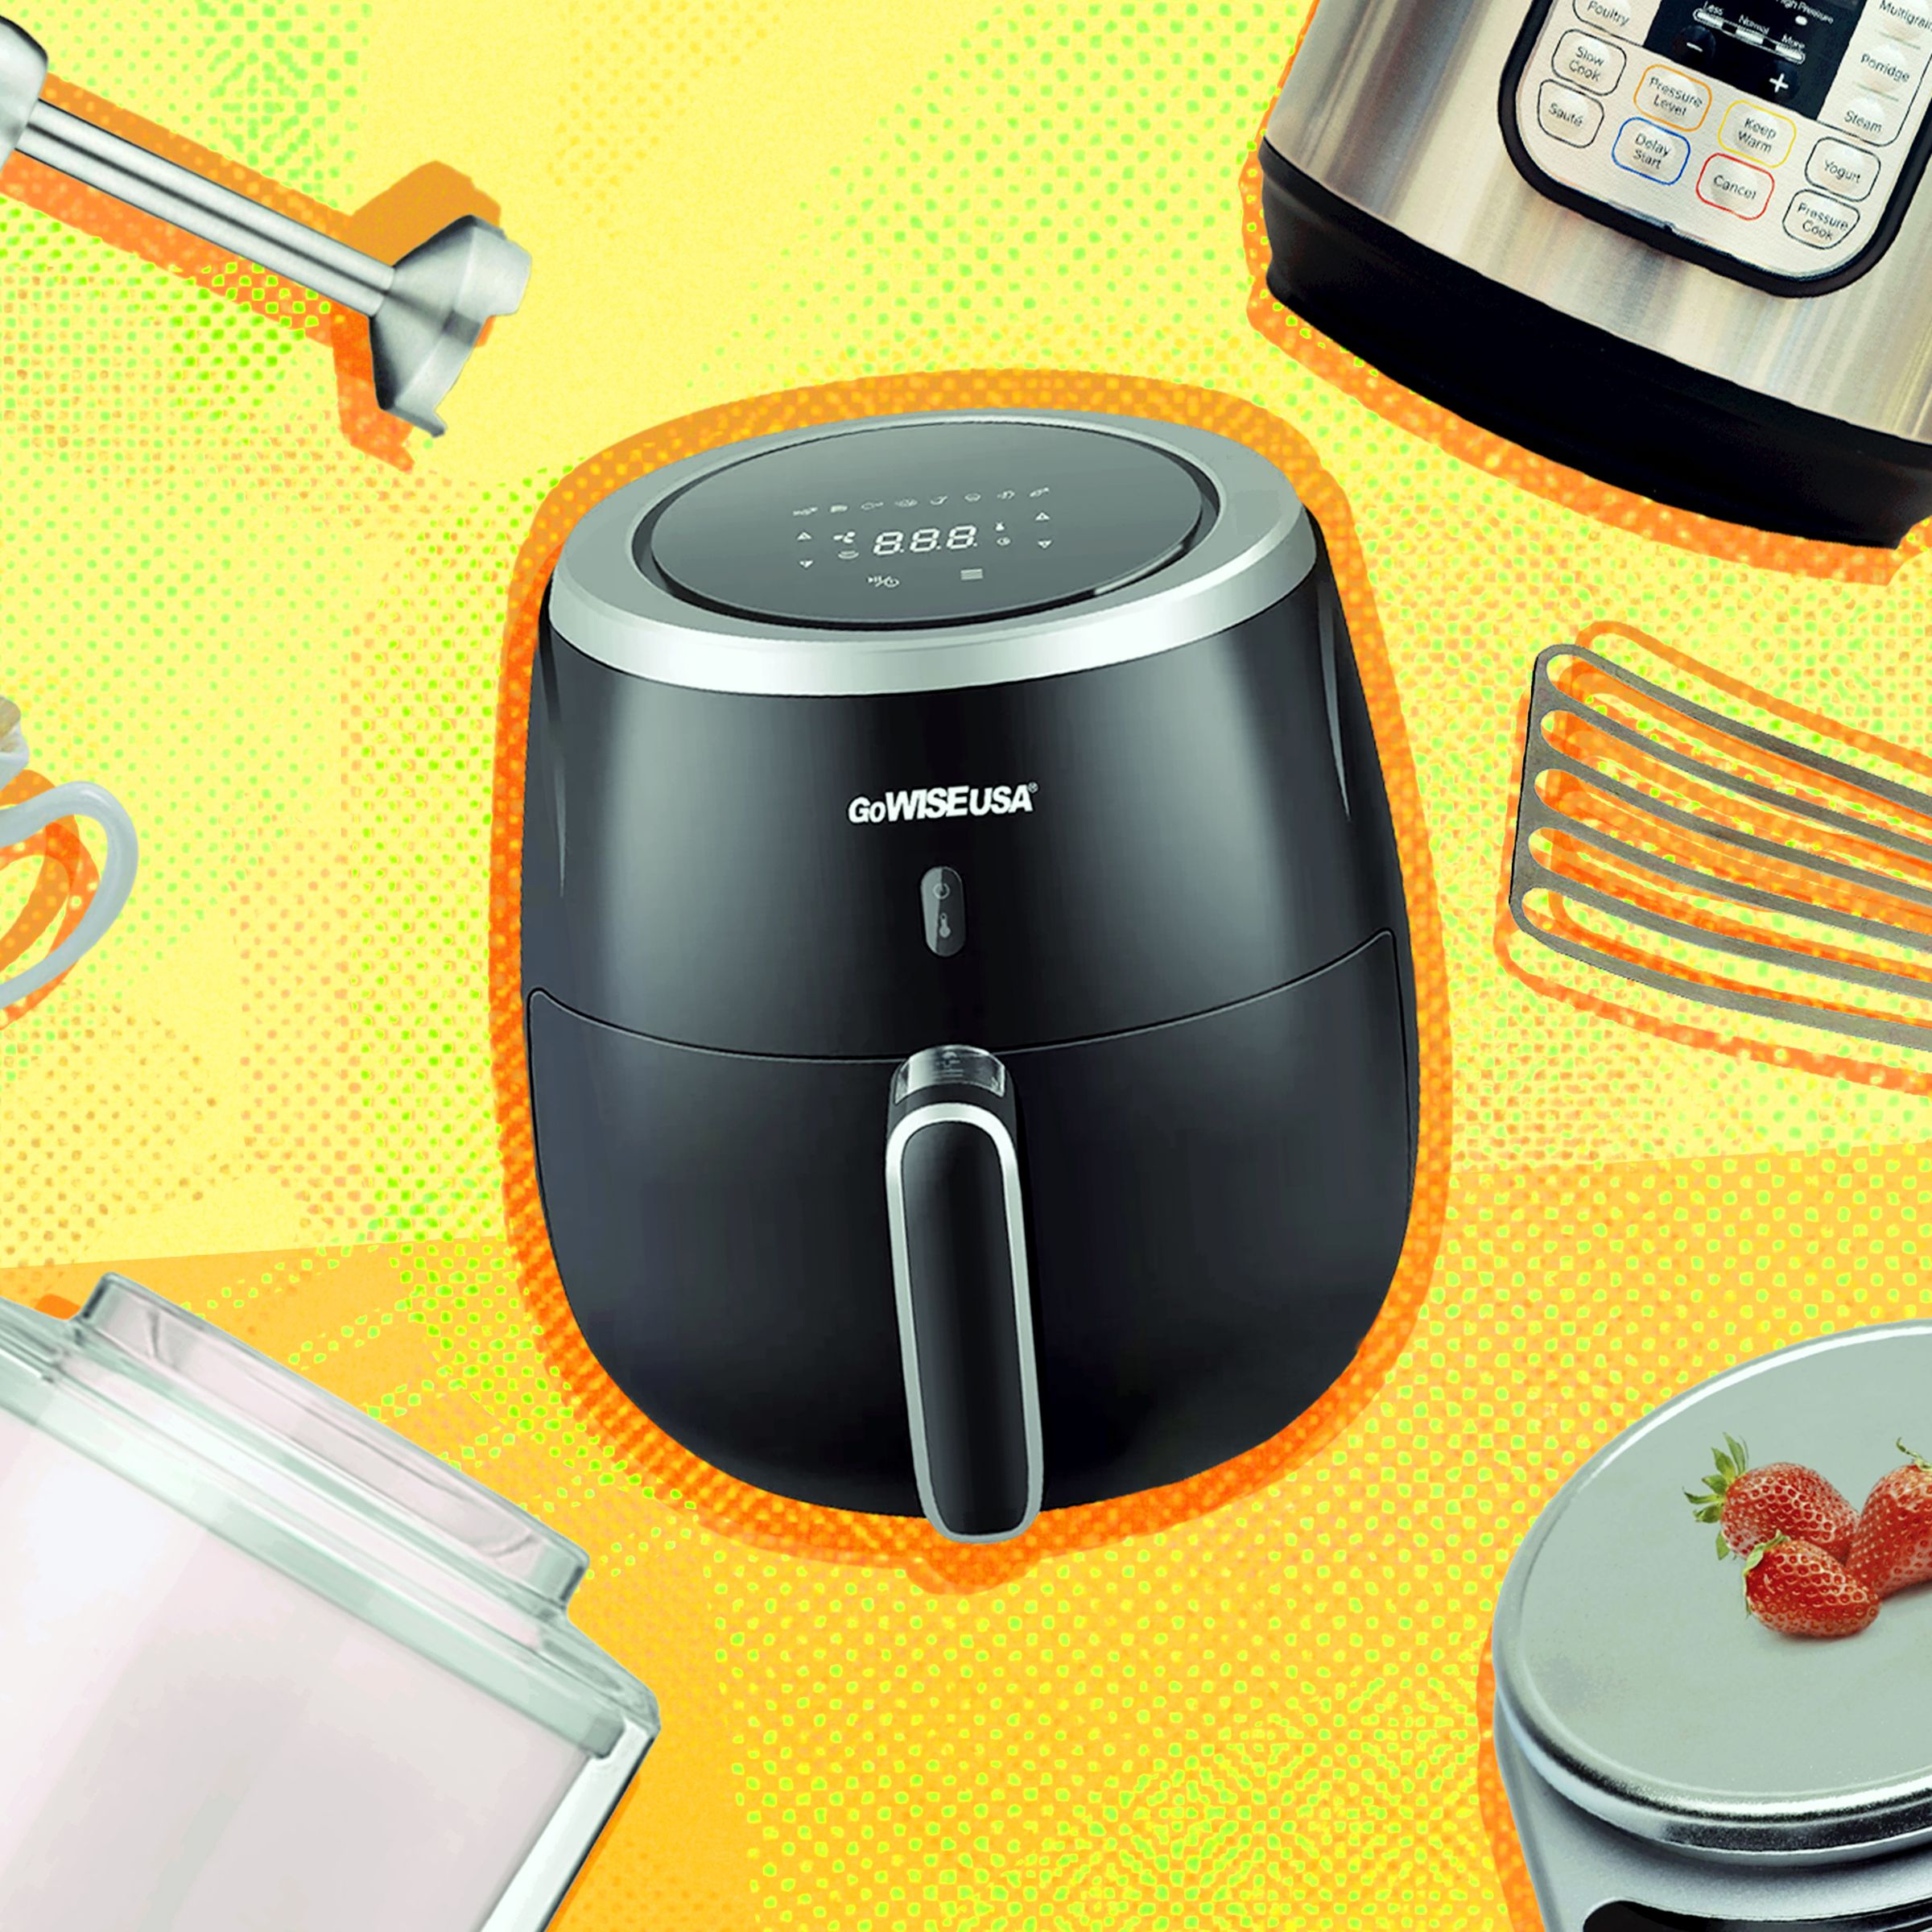 An illustration featuring various kitchen appliances, including an air fryer 